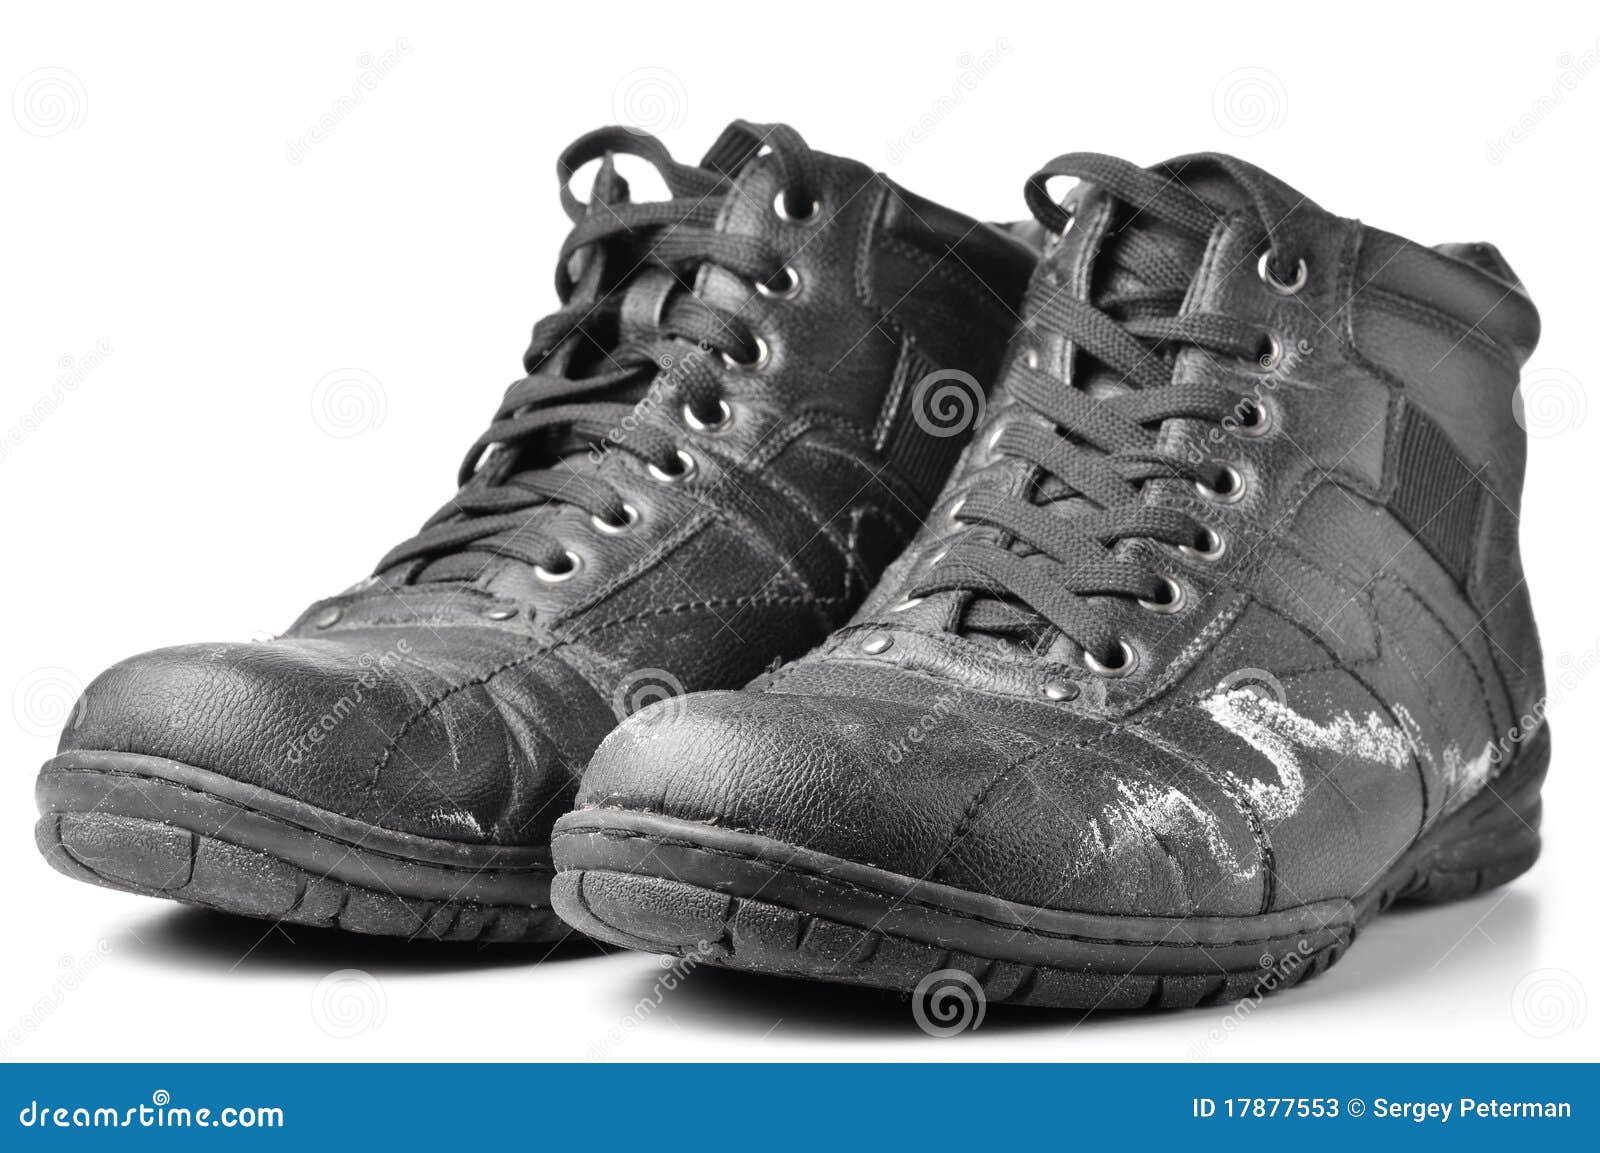 Boots damaged by reagents stock image. Image of pair - 17877553